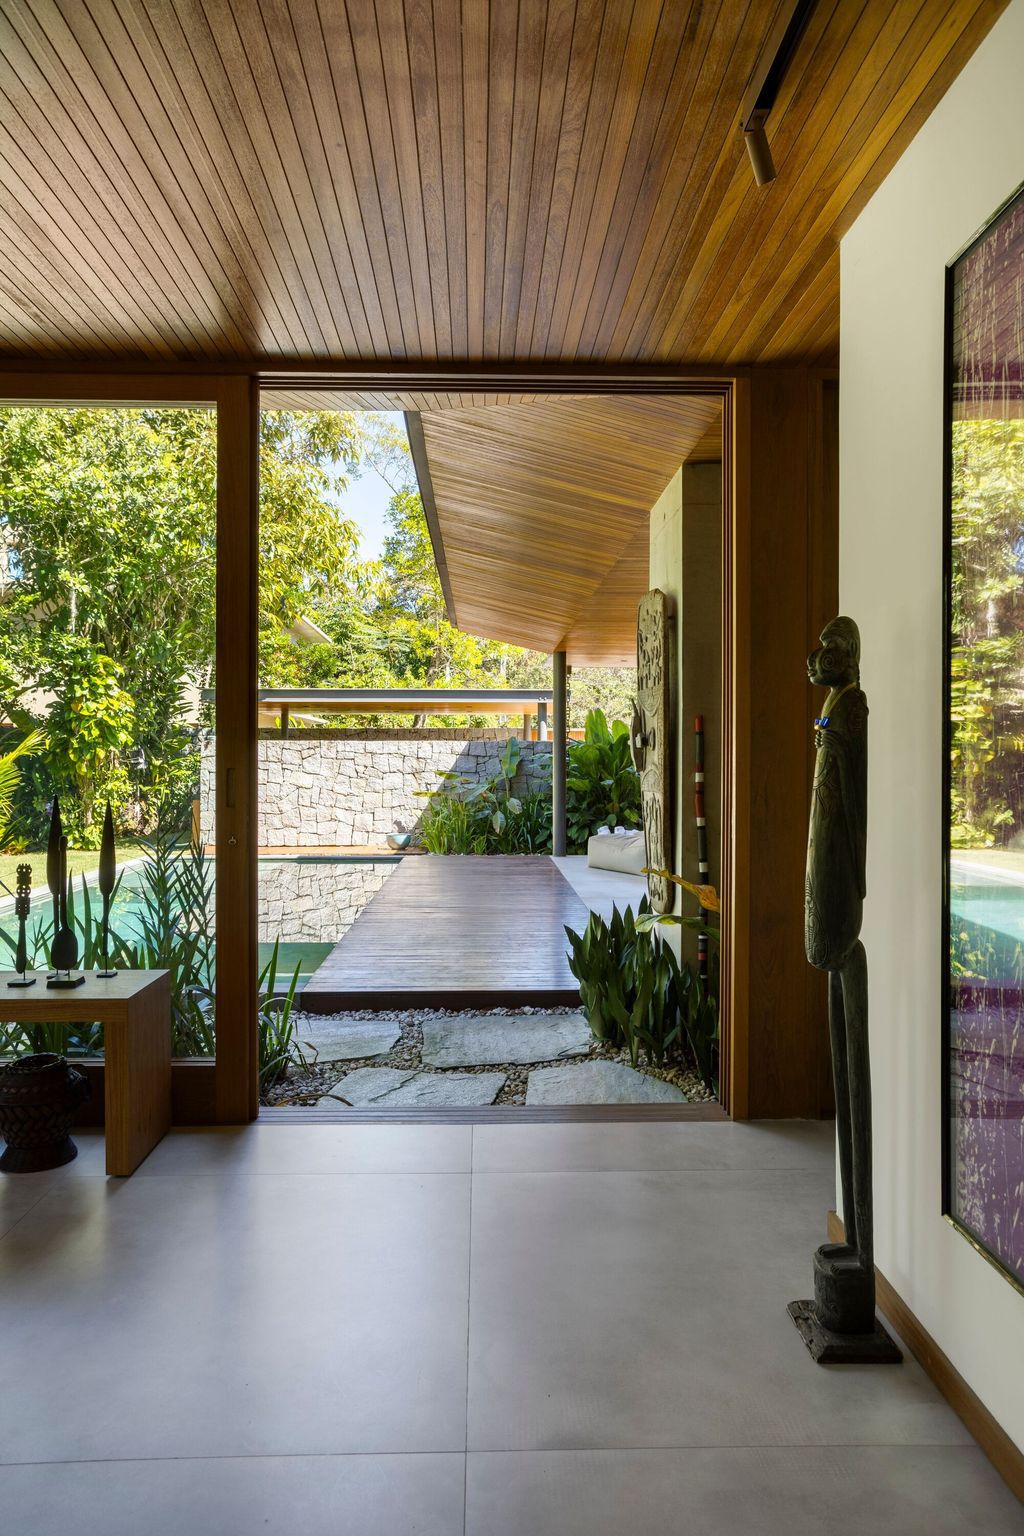 Residence CCL, Blend of Nature and Architecture by Pitta Arquitetura